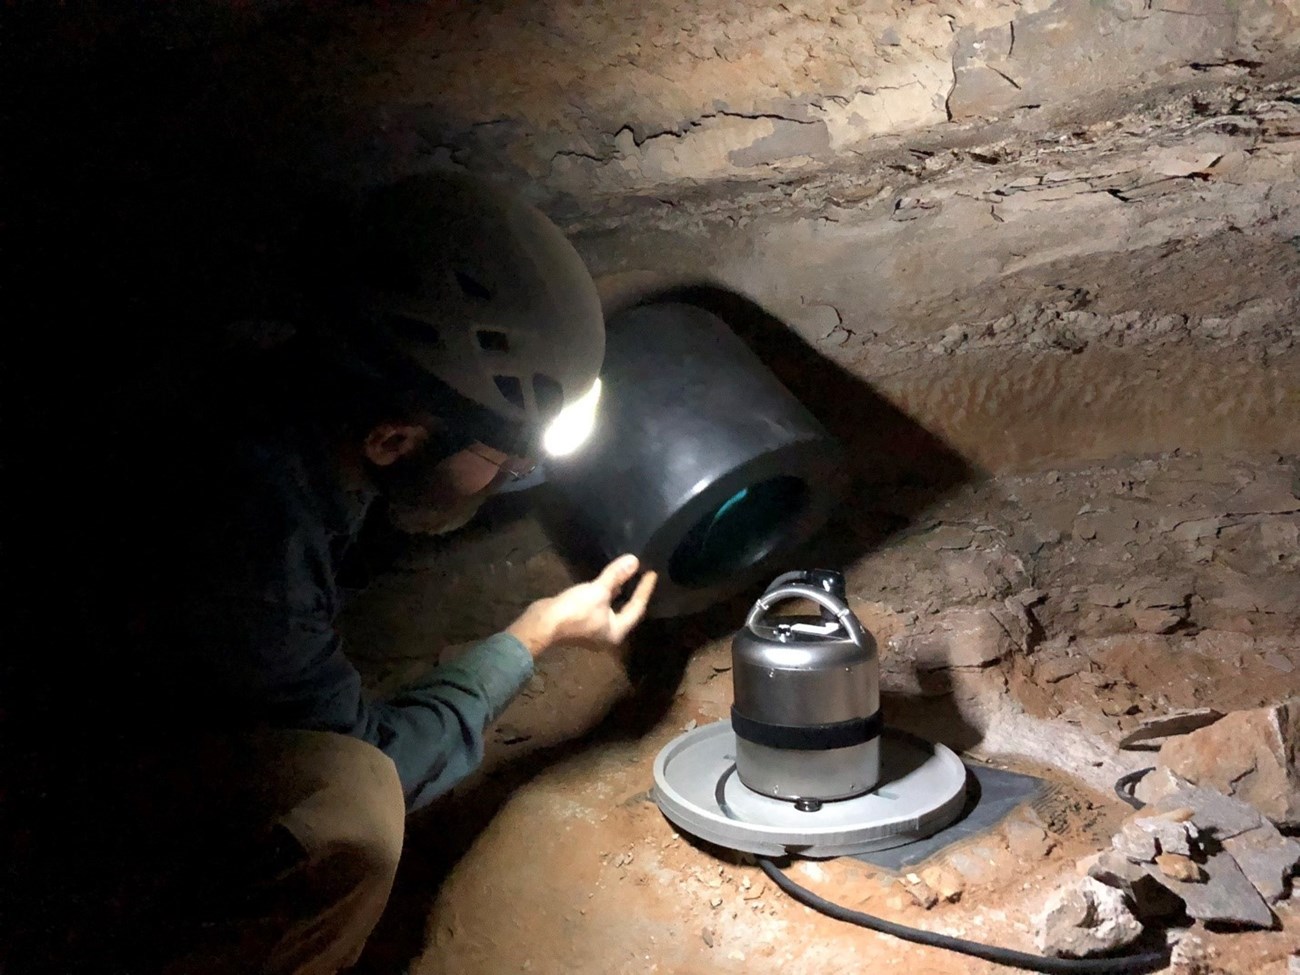 A man installs a shiny silver seismometer within a rocky cave.